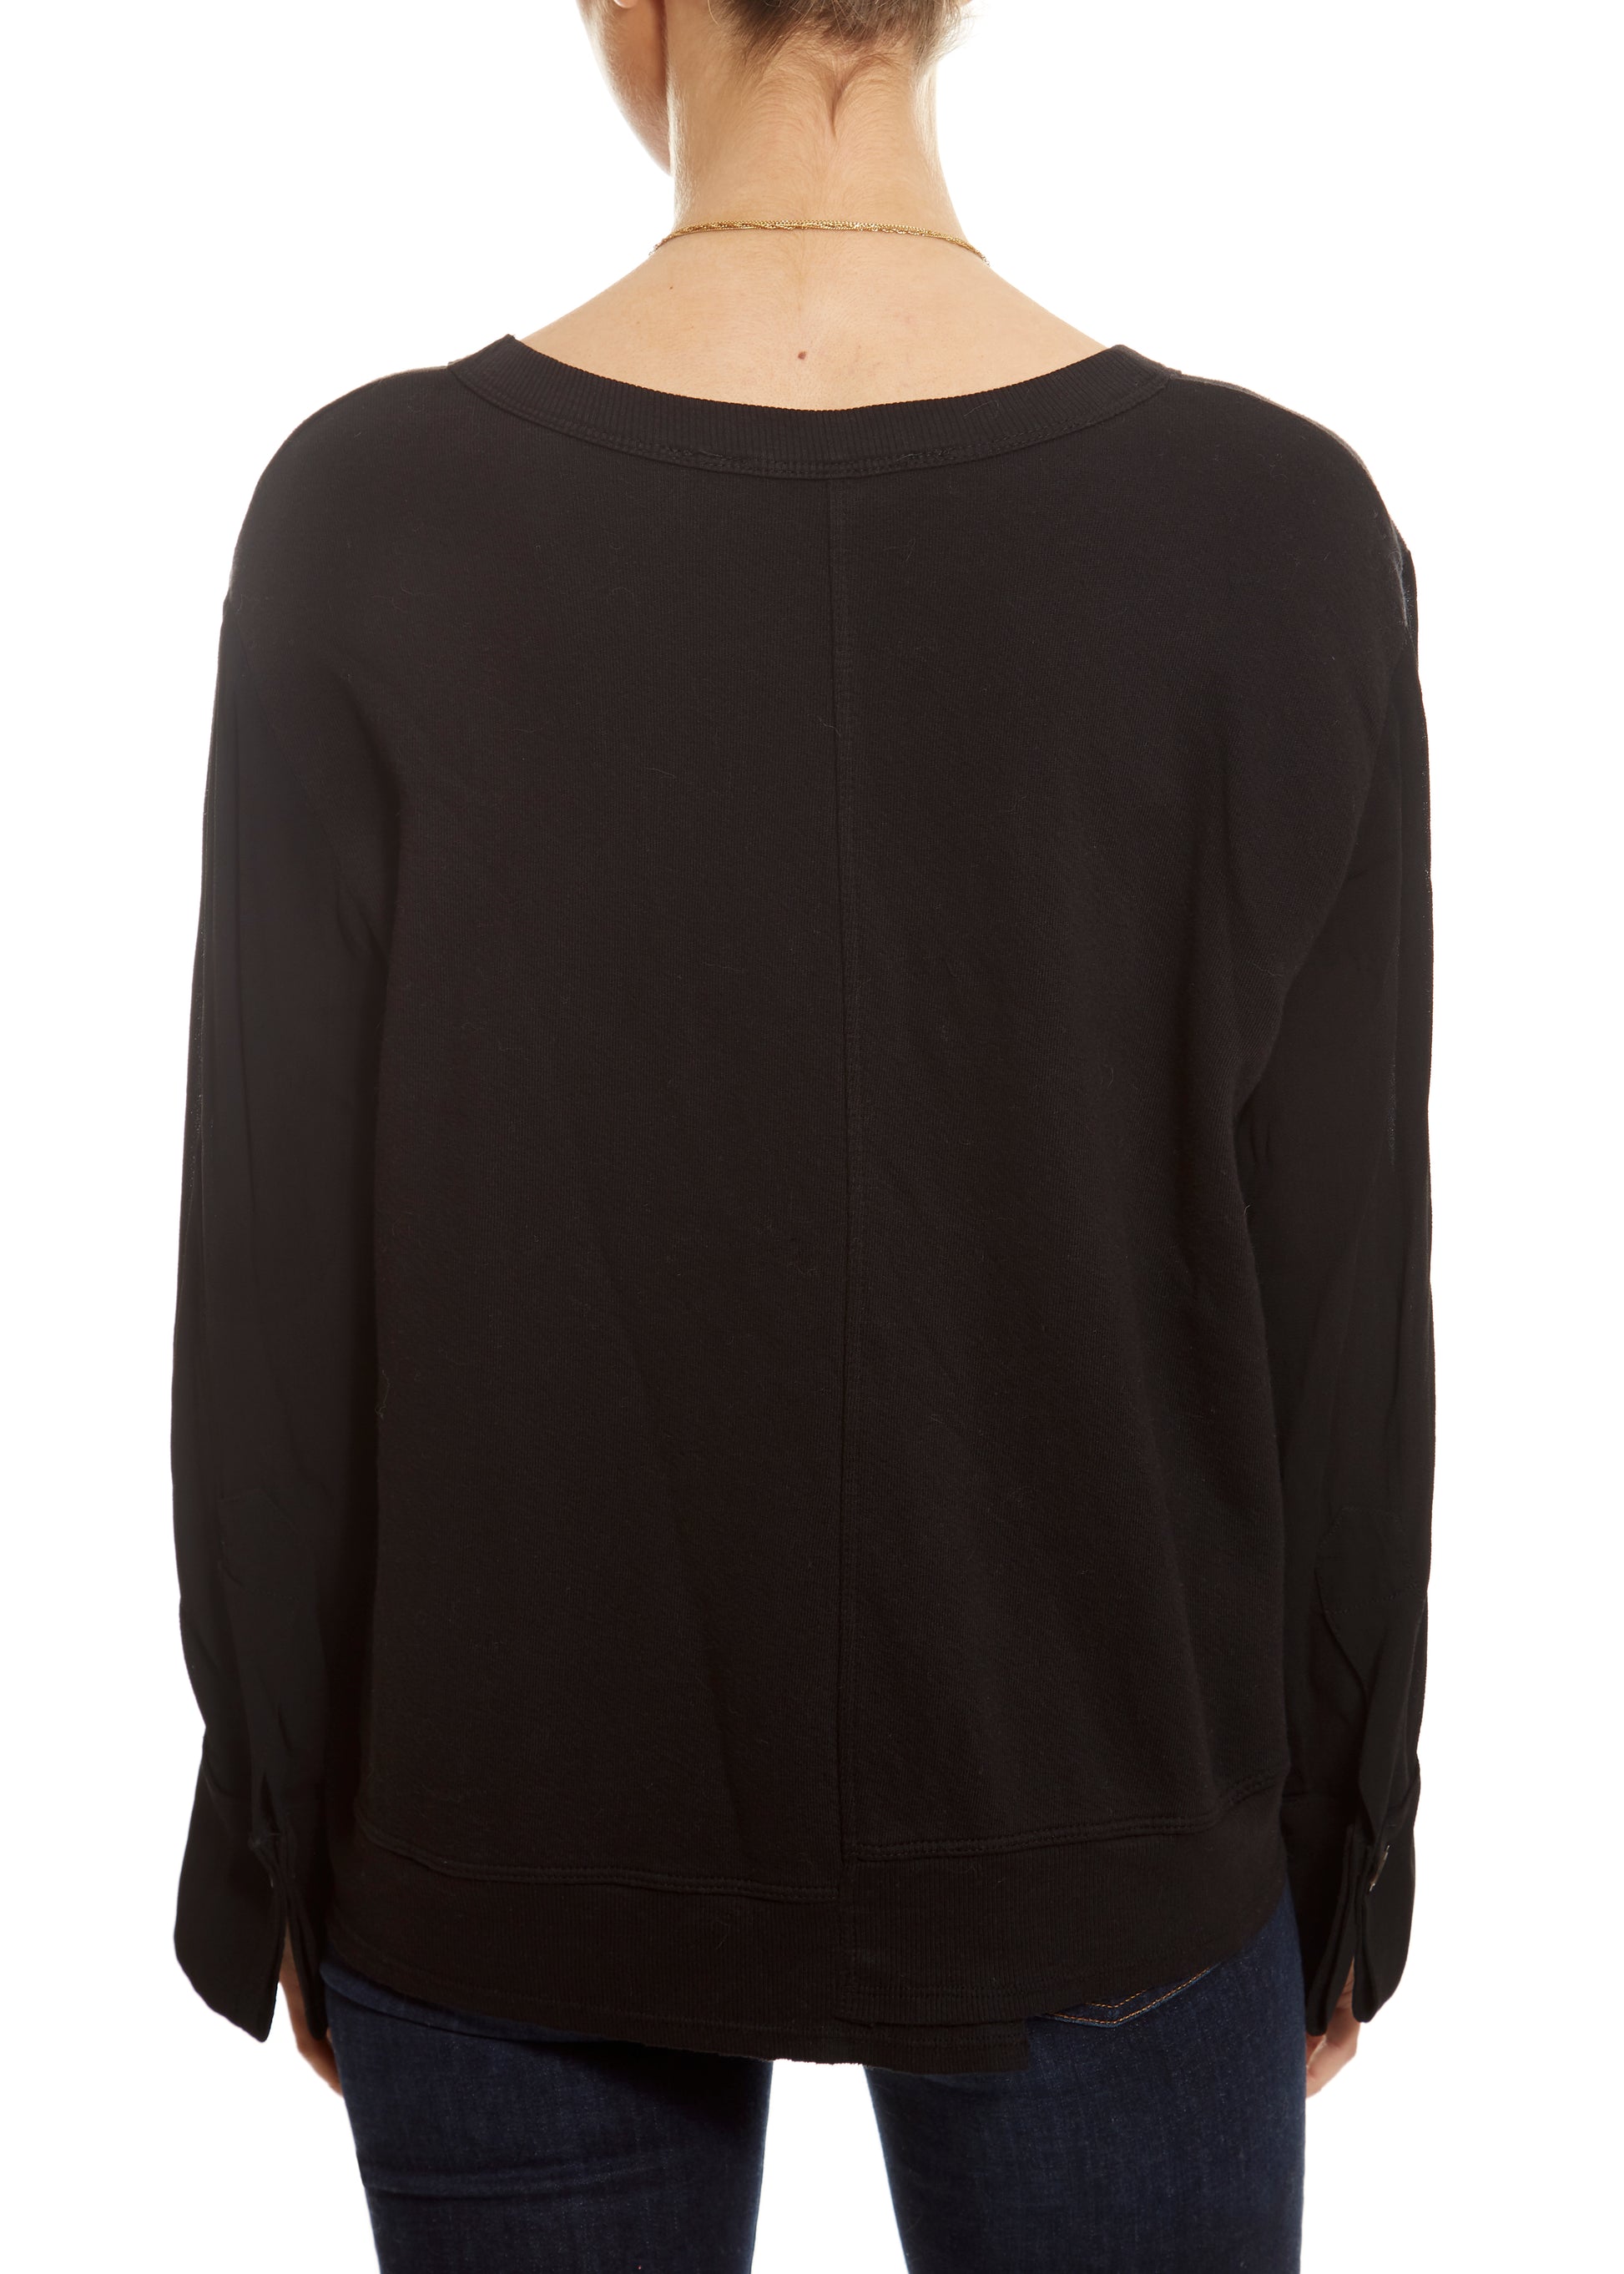 Shifted Sweatshirt with Contrast French Cuffs - Jessimara